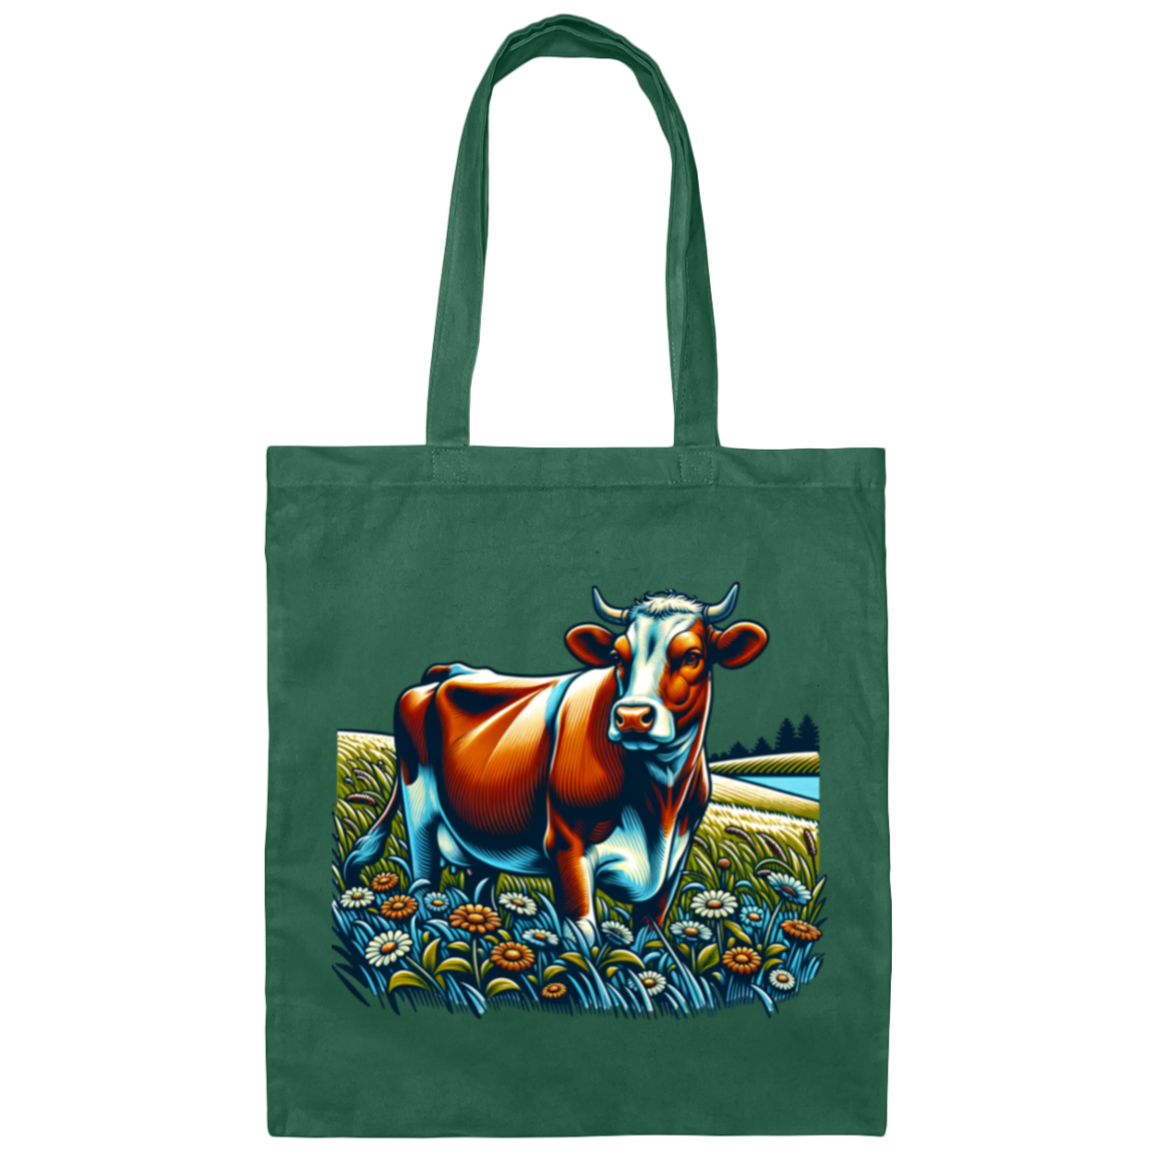 Guernsey with Daisies - Canvas Tote Bag